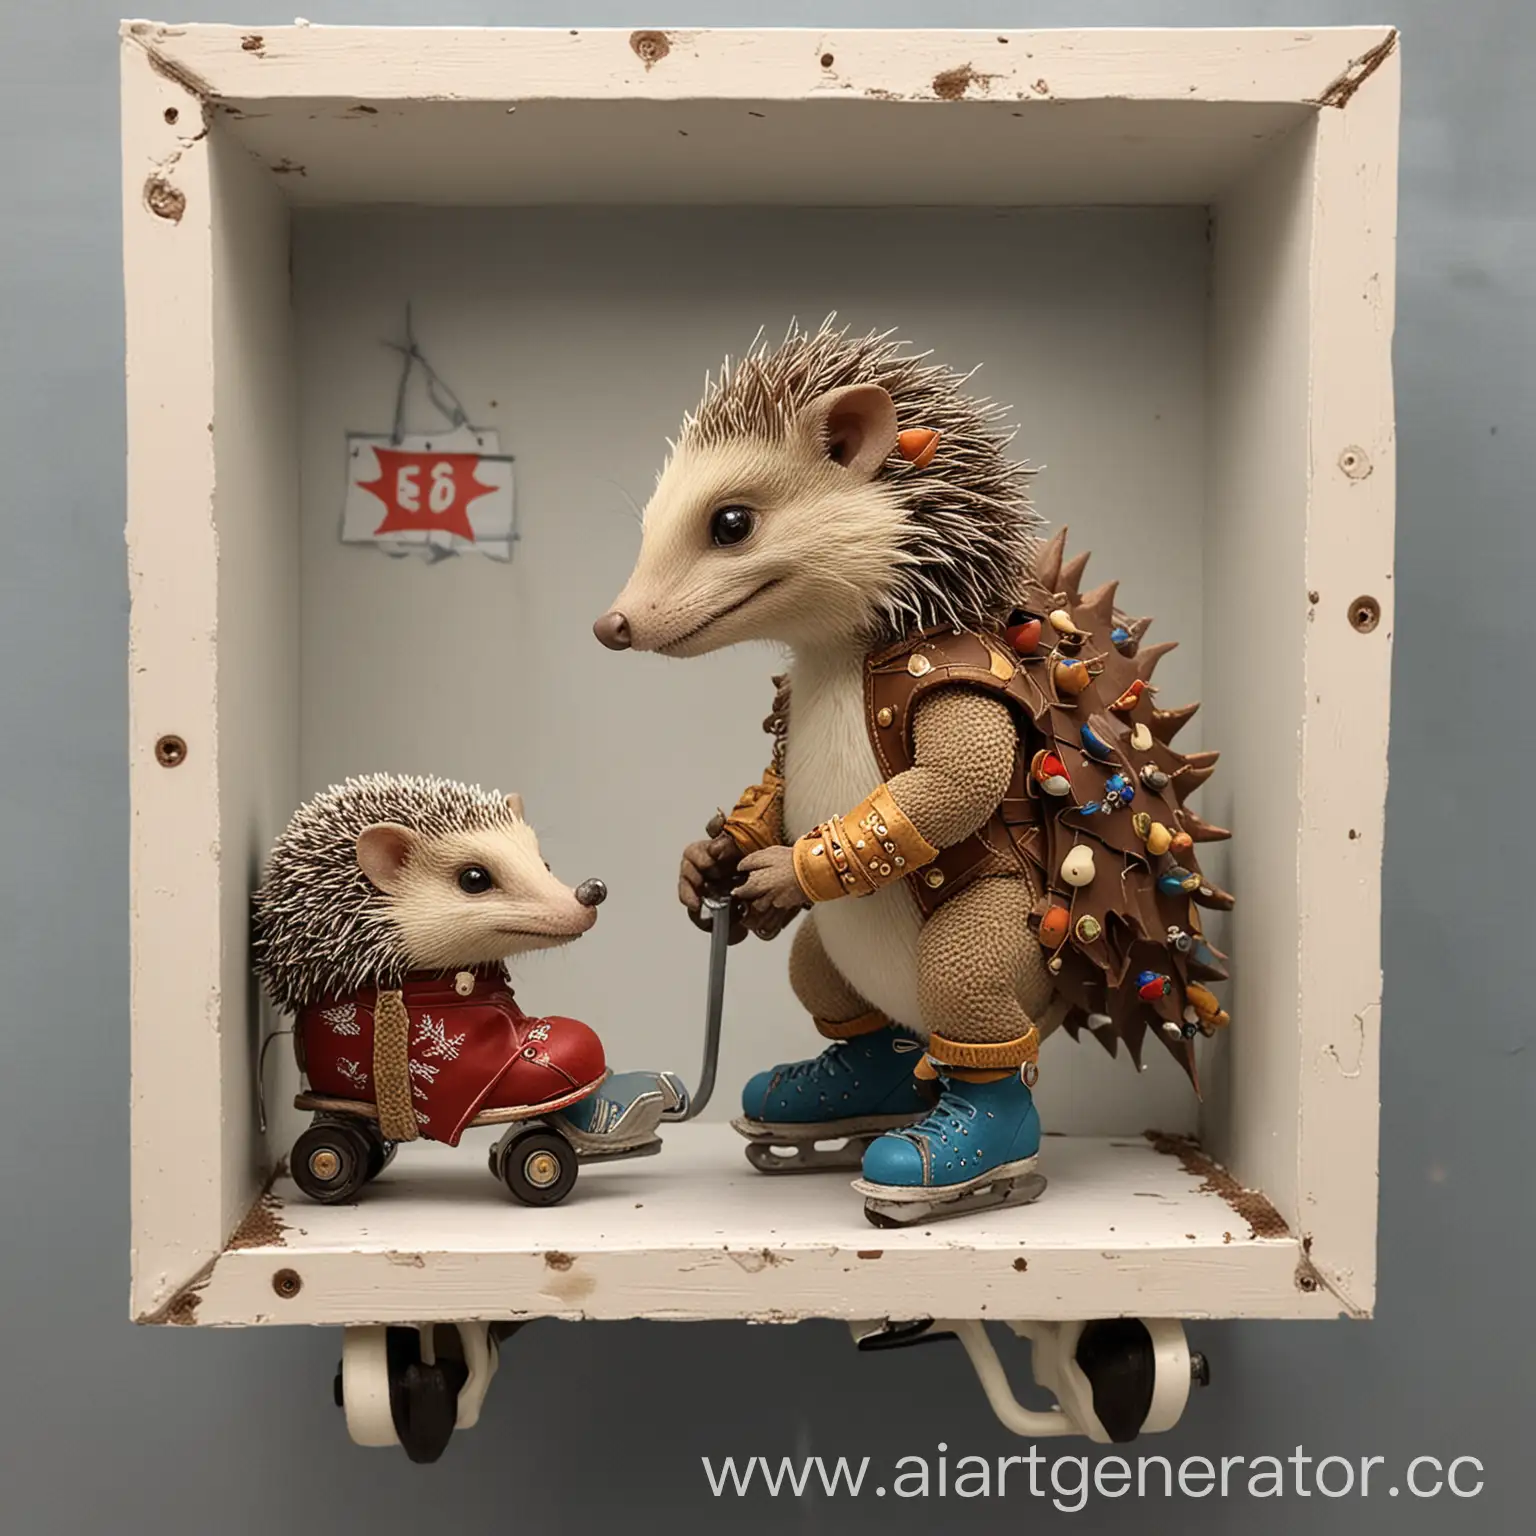 Dragon-Victor-Searching-for-Skating-Hedgehog-in-Decorated-Cell